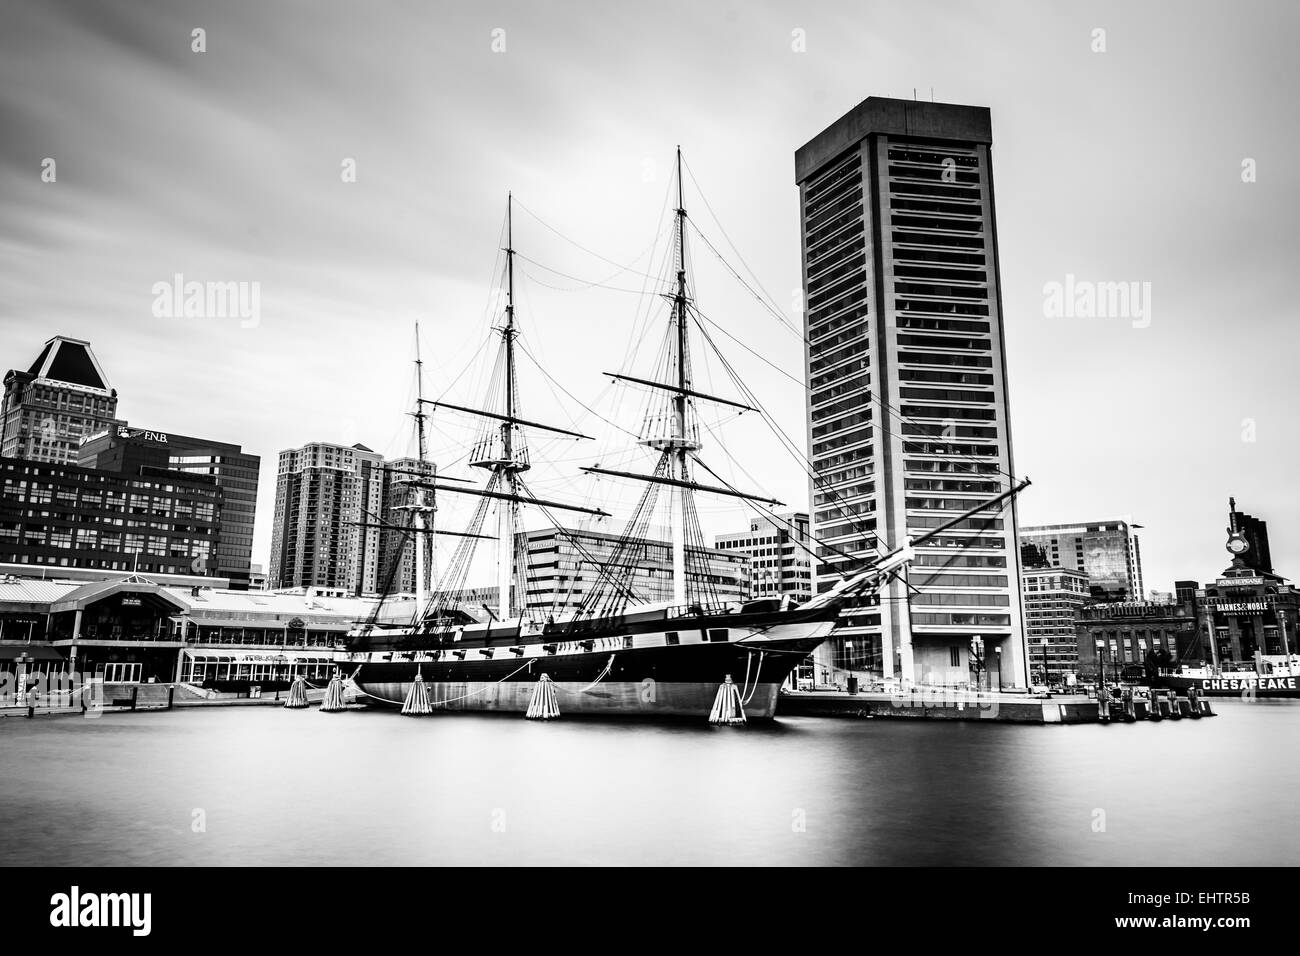 Long exposure of the USS Constellation and World Trade Center, in Baltimore, Maryland. Stock Photo